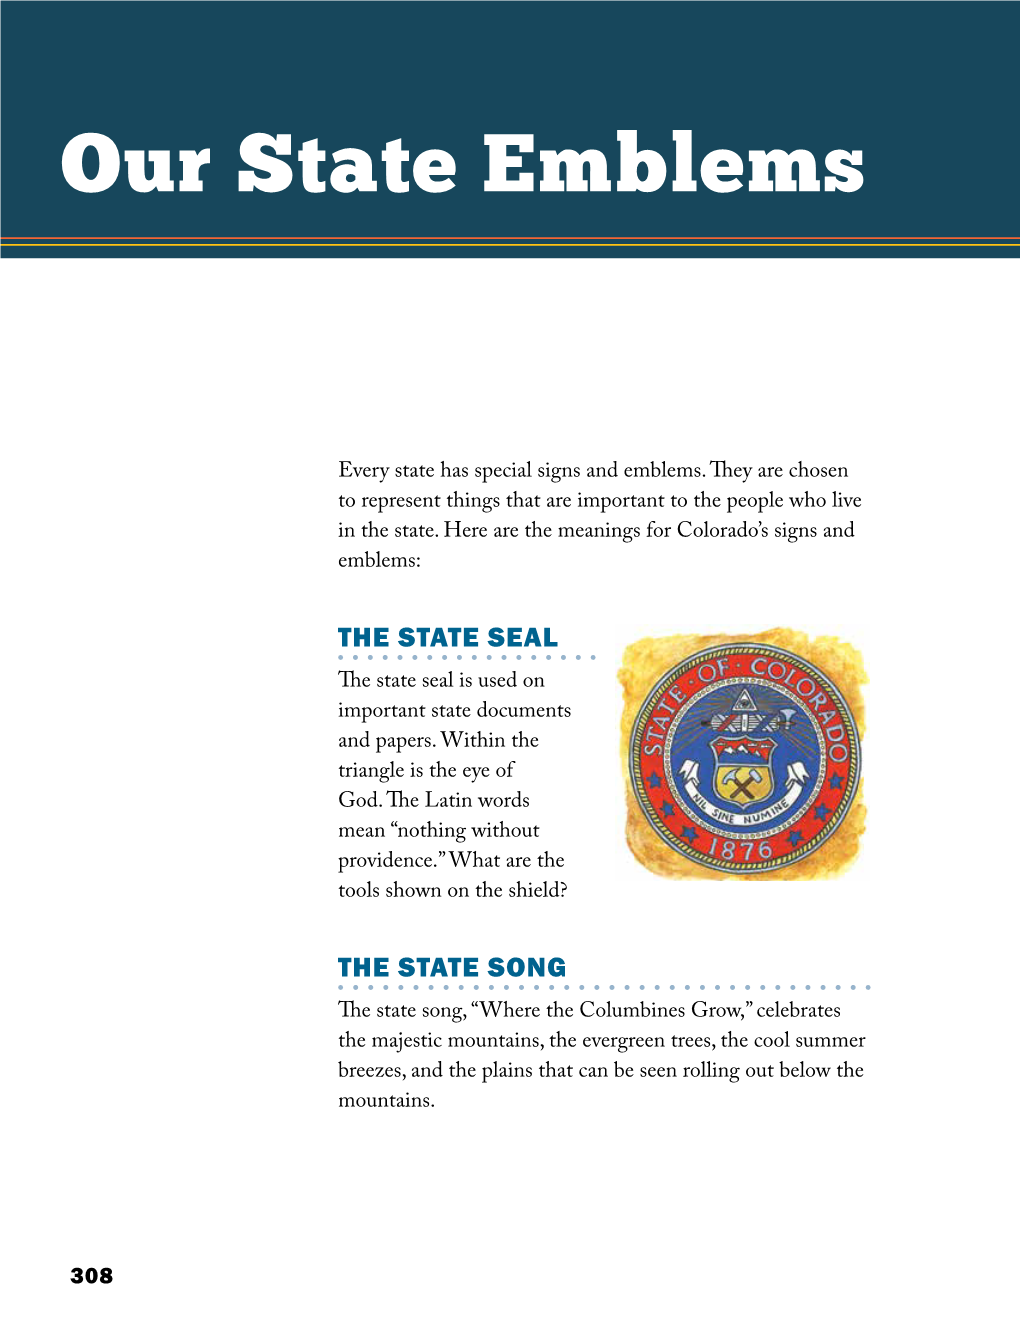 Our State Emblems